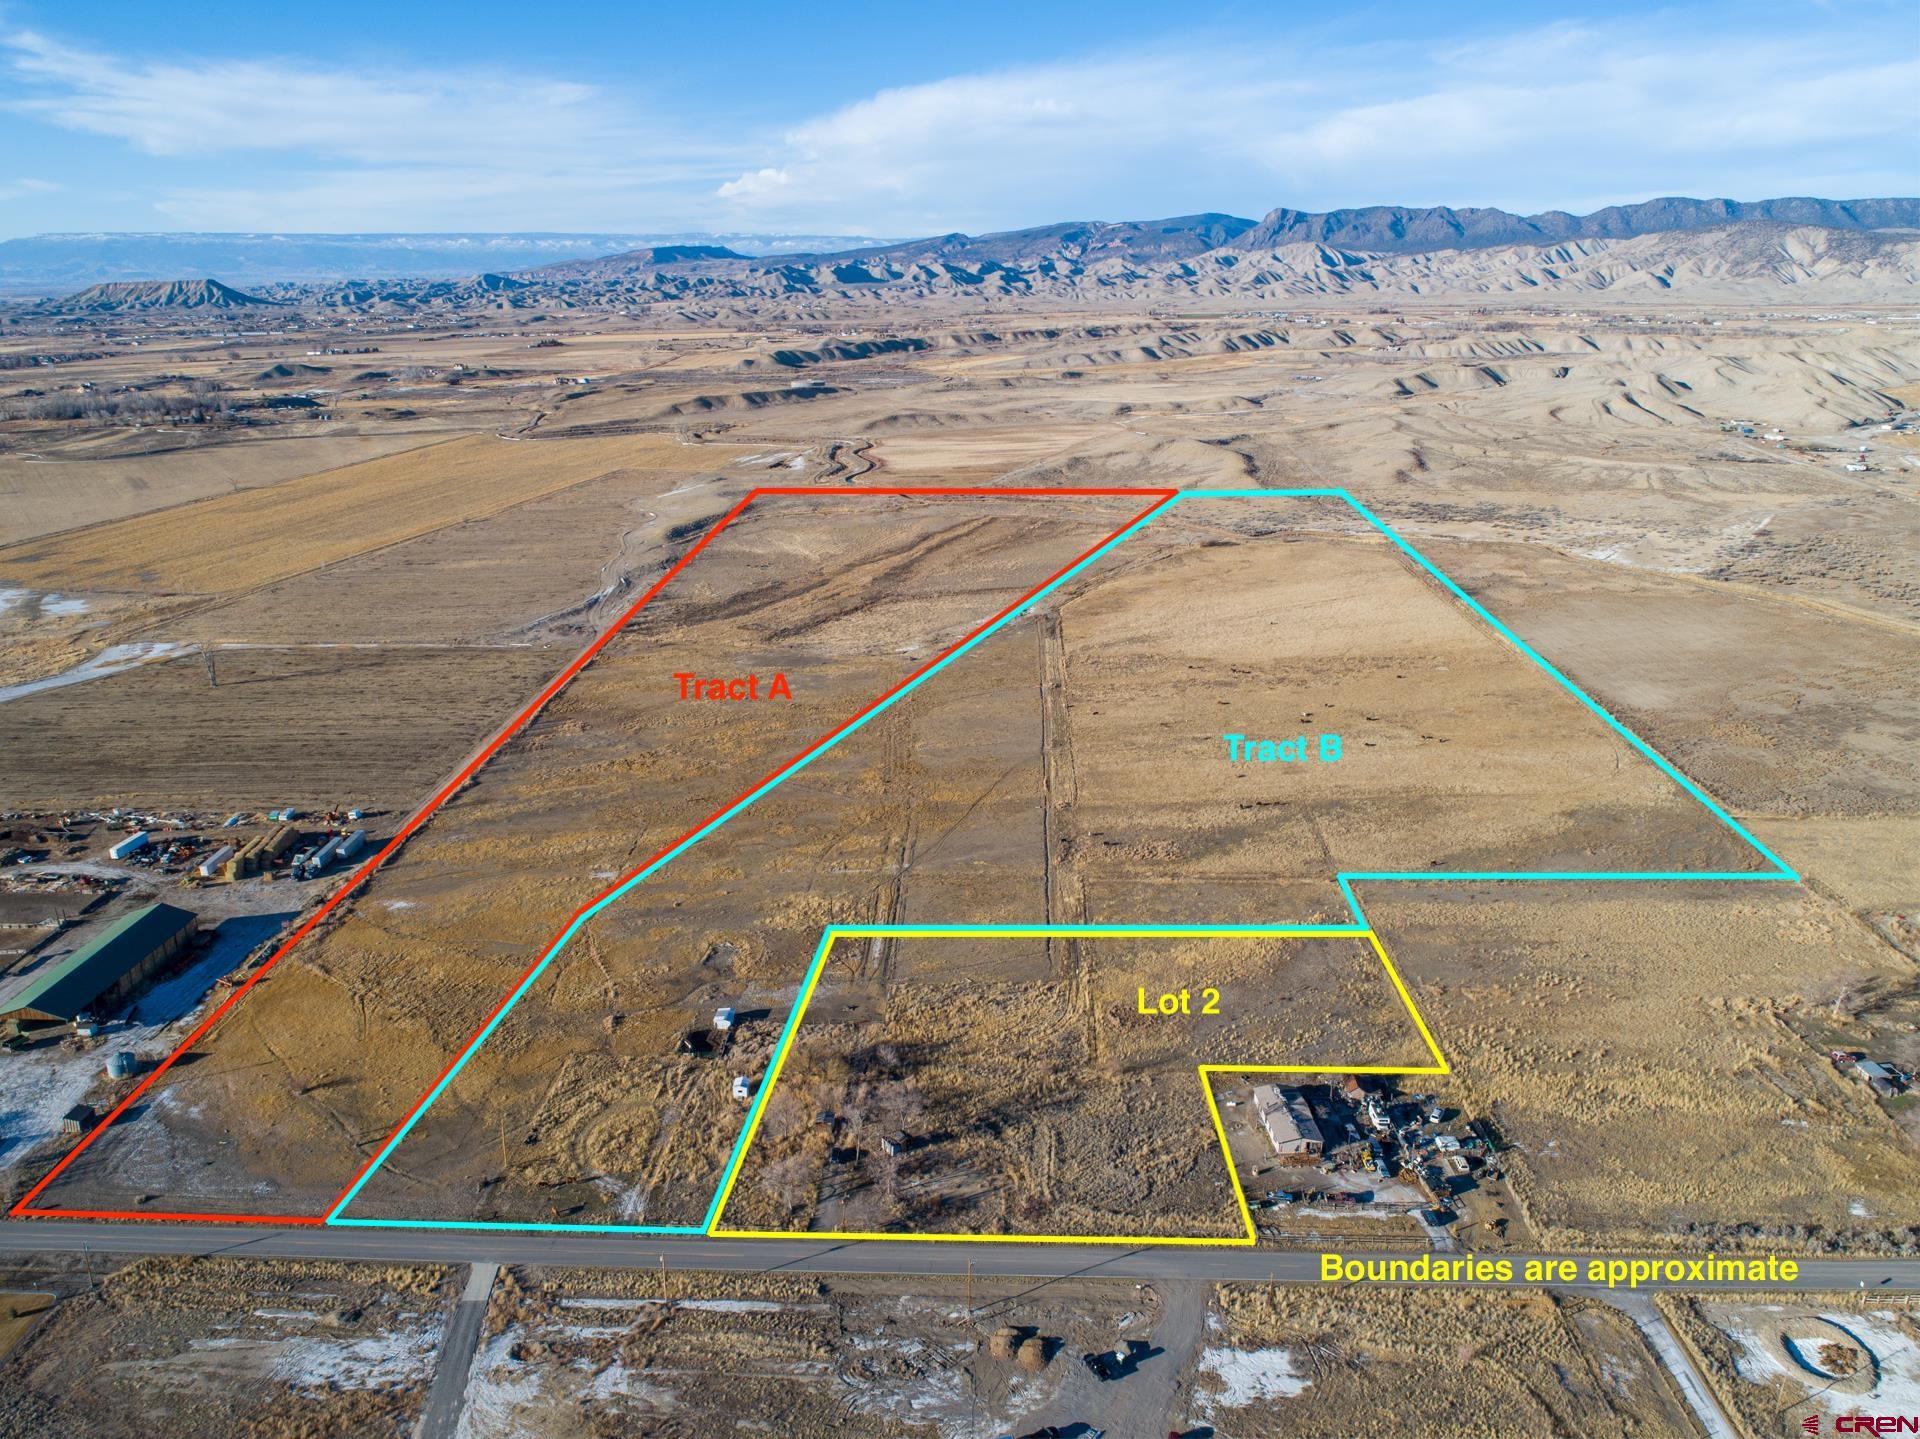 DEVELOPEMENT POTENTIAL. Great location to build your dream home, mini ranch or family compound!  Close to town... yet far enough away to allow for privacy.  Easily accessible off paved county road.  Mountain views! NO HOA or covenants!  Located in Montrose County.  Tri County Water, DMEA available "not paid or installed" on Tract A & 3.  Well possibilities.  Lot 2 TCW & DMEA paid and installed. Multiple home building site locations and plenty of room to add a detached shop/garage/barn.